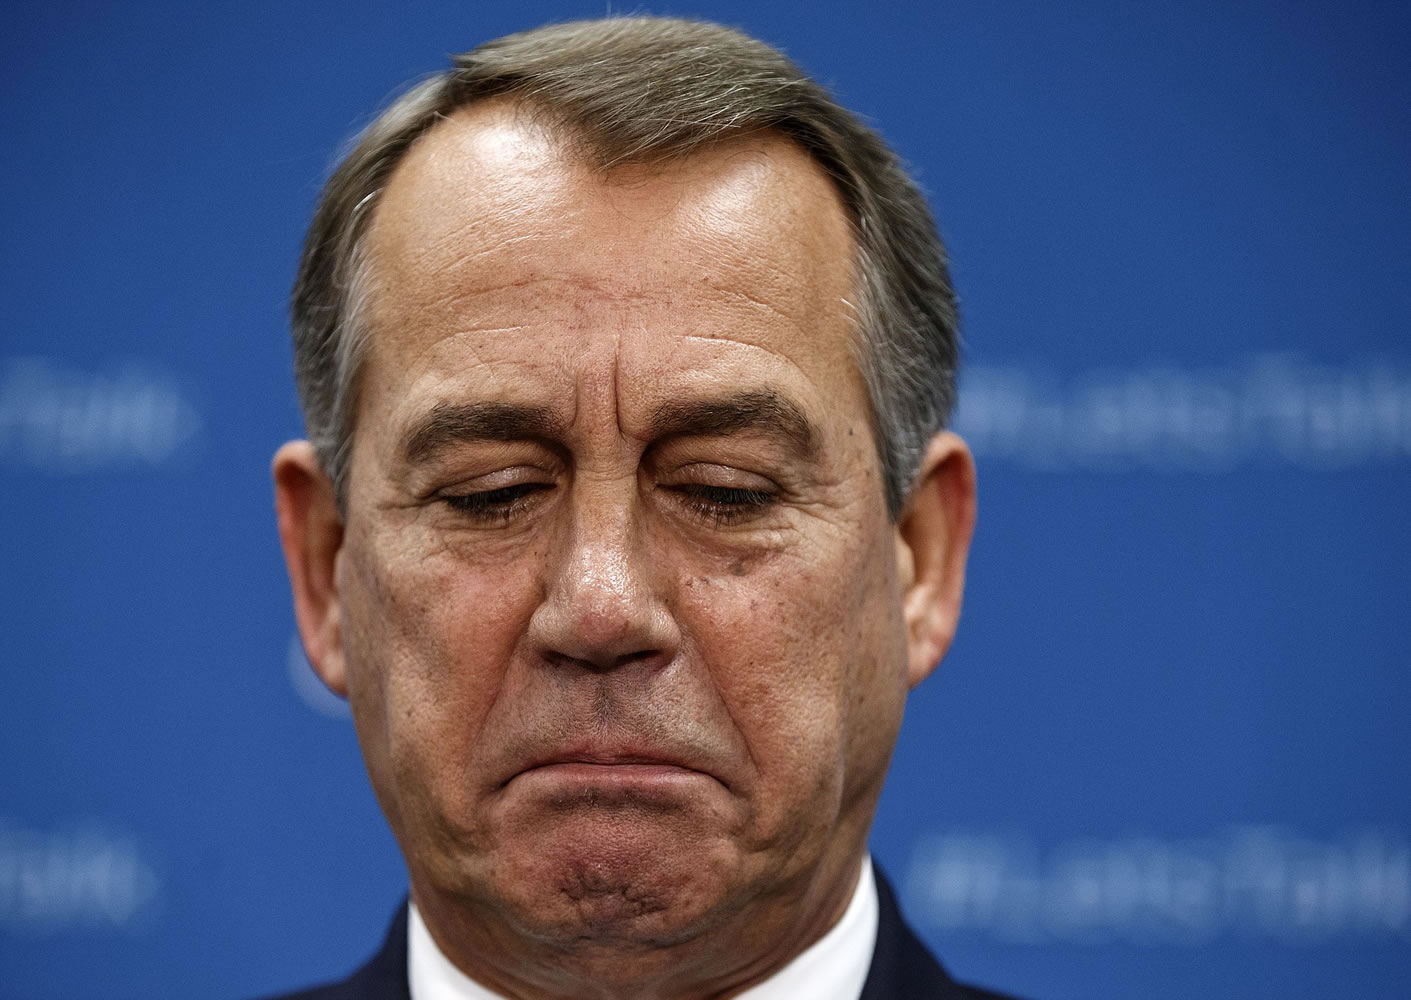 House Speaker John Boehner of Ohio pauses during a news conference on Capitol Hill in Washington on Oct.